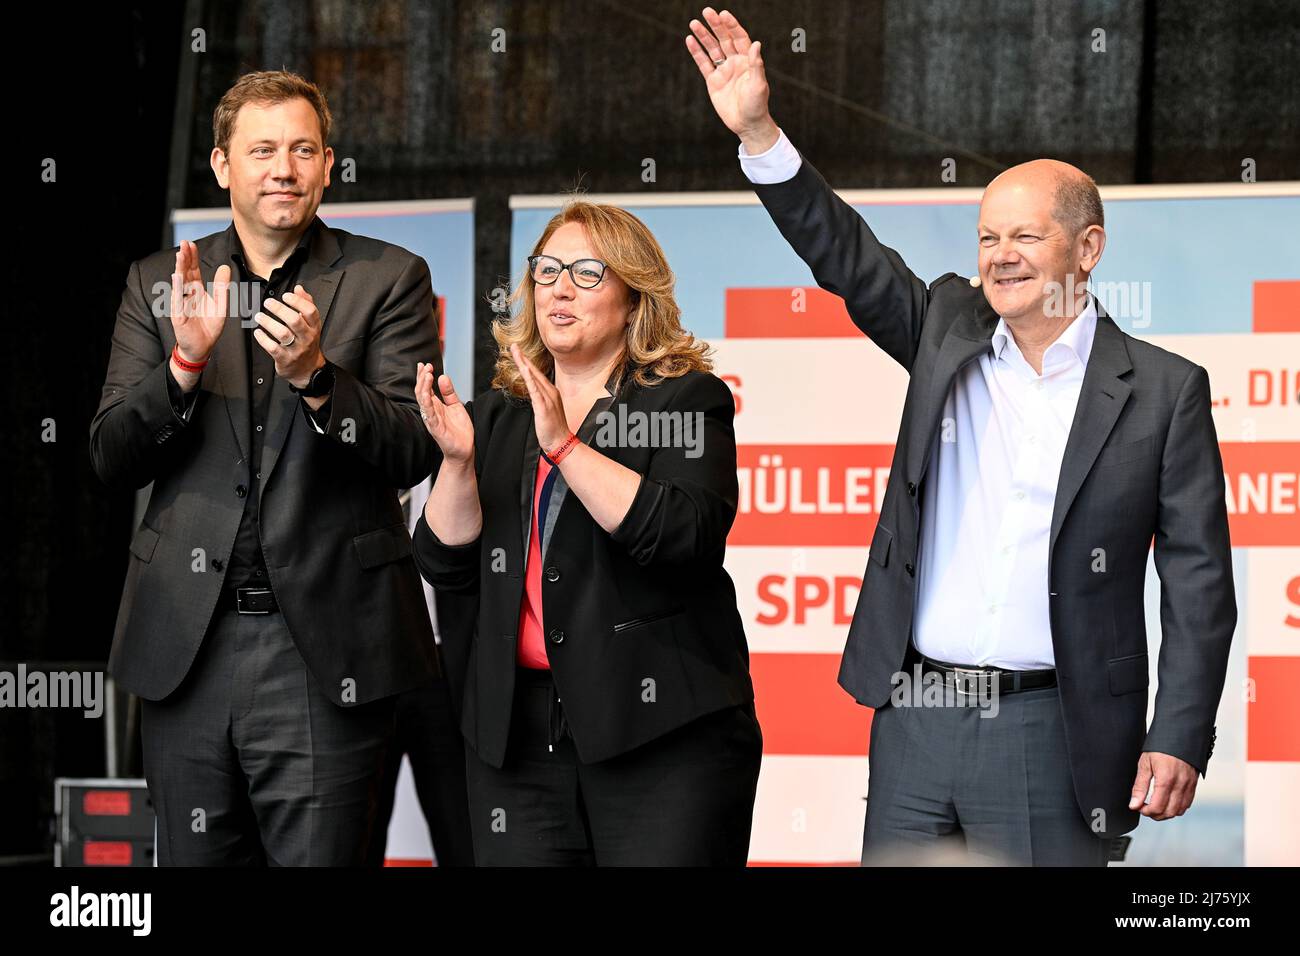 German Chancellor Olaf Scholz waves to the public as SPD party co-chairman Lars Klingbeil applauds at an election campaign rally of the Social Democrats (SPD) for the upcoming Schleswig-Holstein state elections, in Kiel, Germany, May 6, 2022. REUTERS/Fabian Bimmer Stock Photo